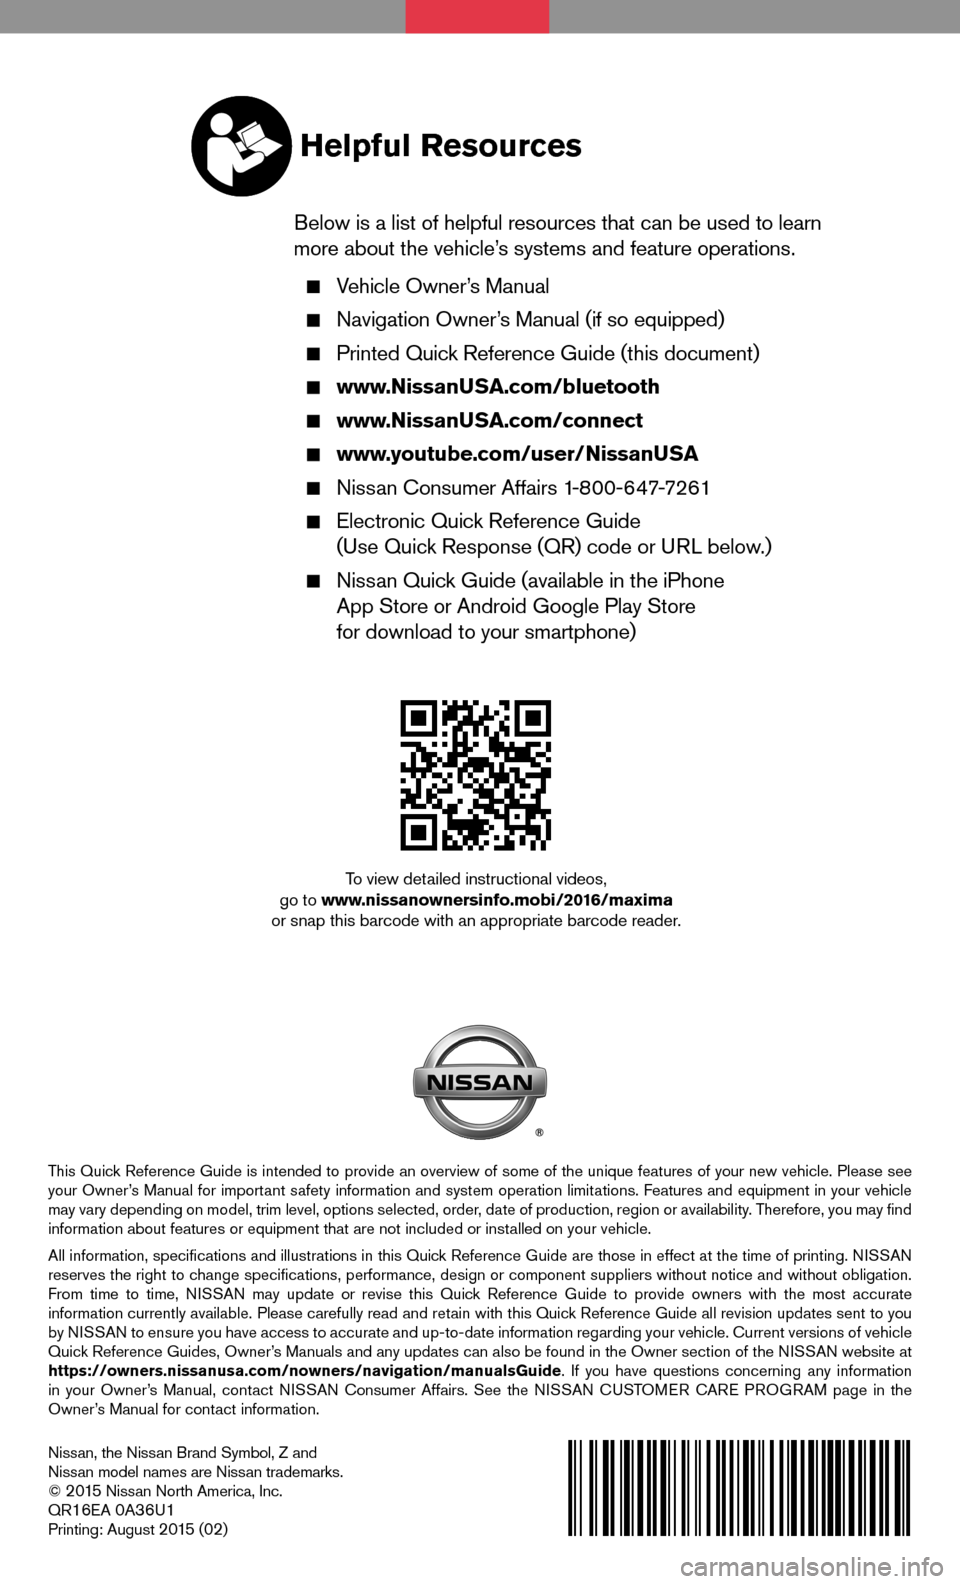 NISSAN MAXIMA 2016 A36 / 8.G Quick Reference Guide Nissan, the Nissan Brand Symbol, Z and Nissan model names are Nissan trademarks.© 2 015 Nissan North America, Inc.QR16EA 0A36U1Printing: August 2 015 (02)
To view detailed instructional videos, go to